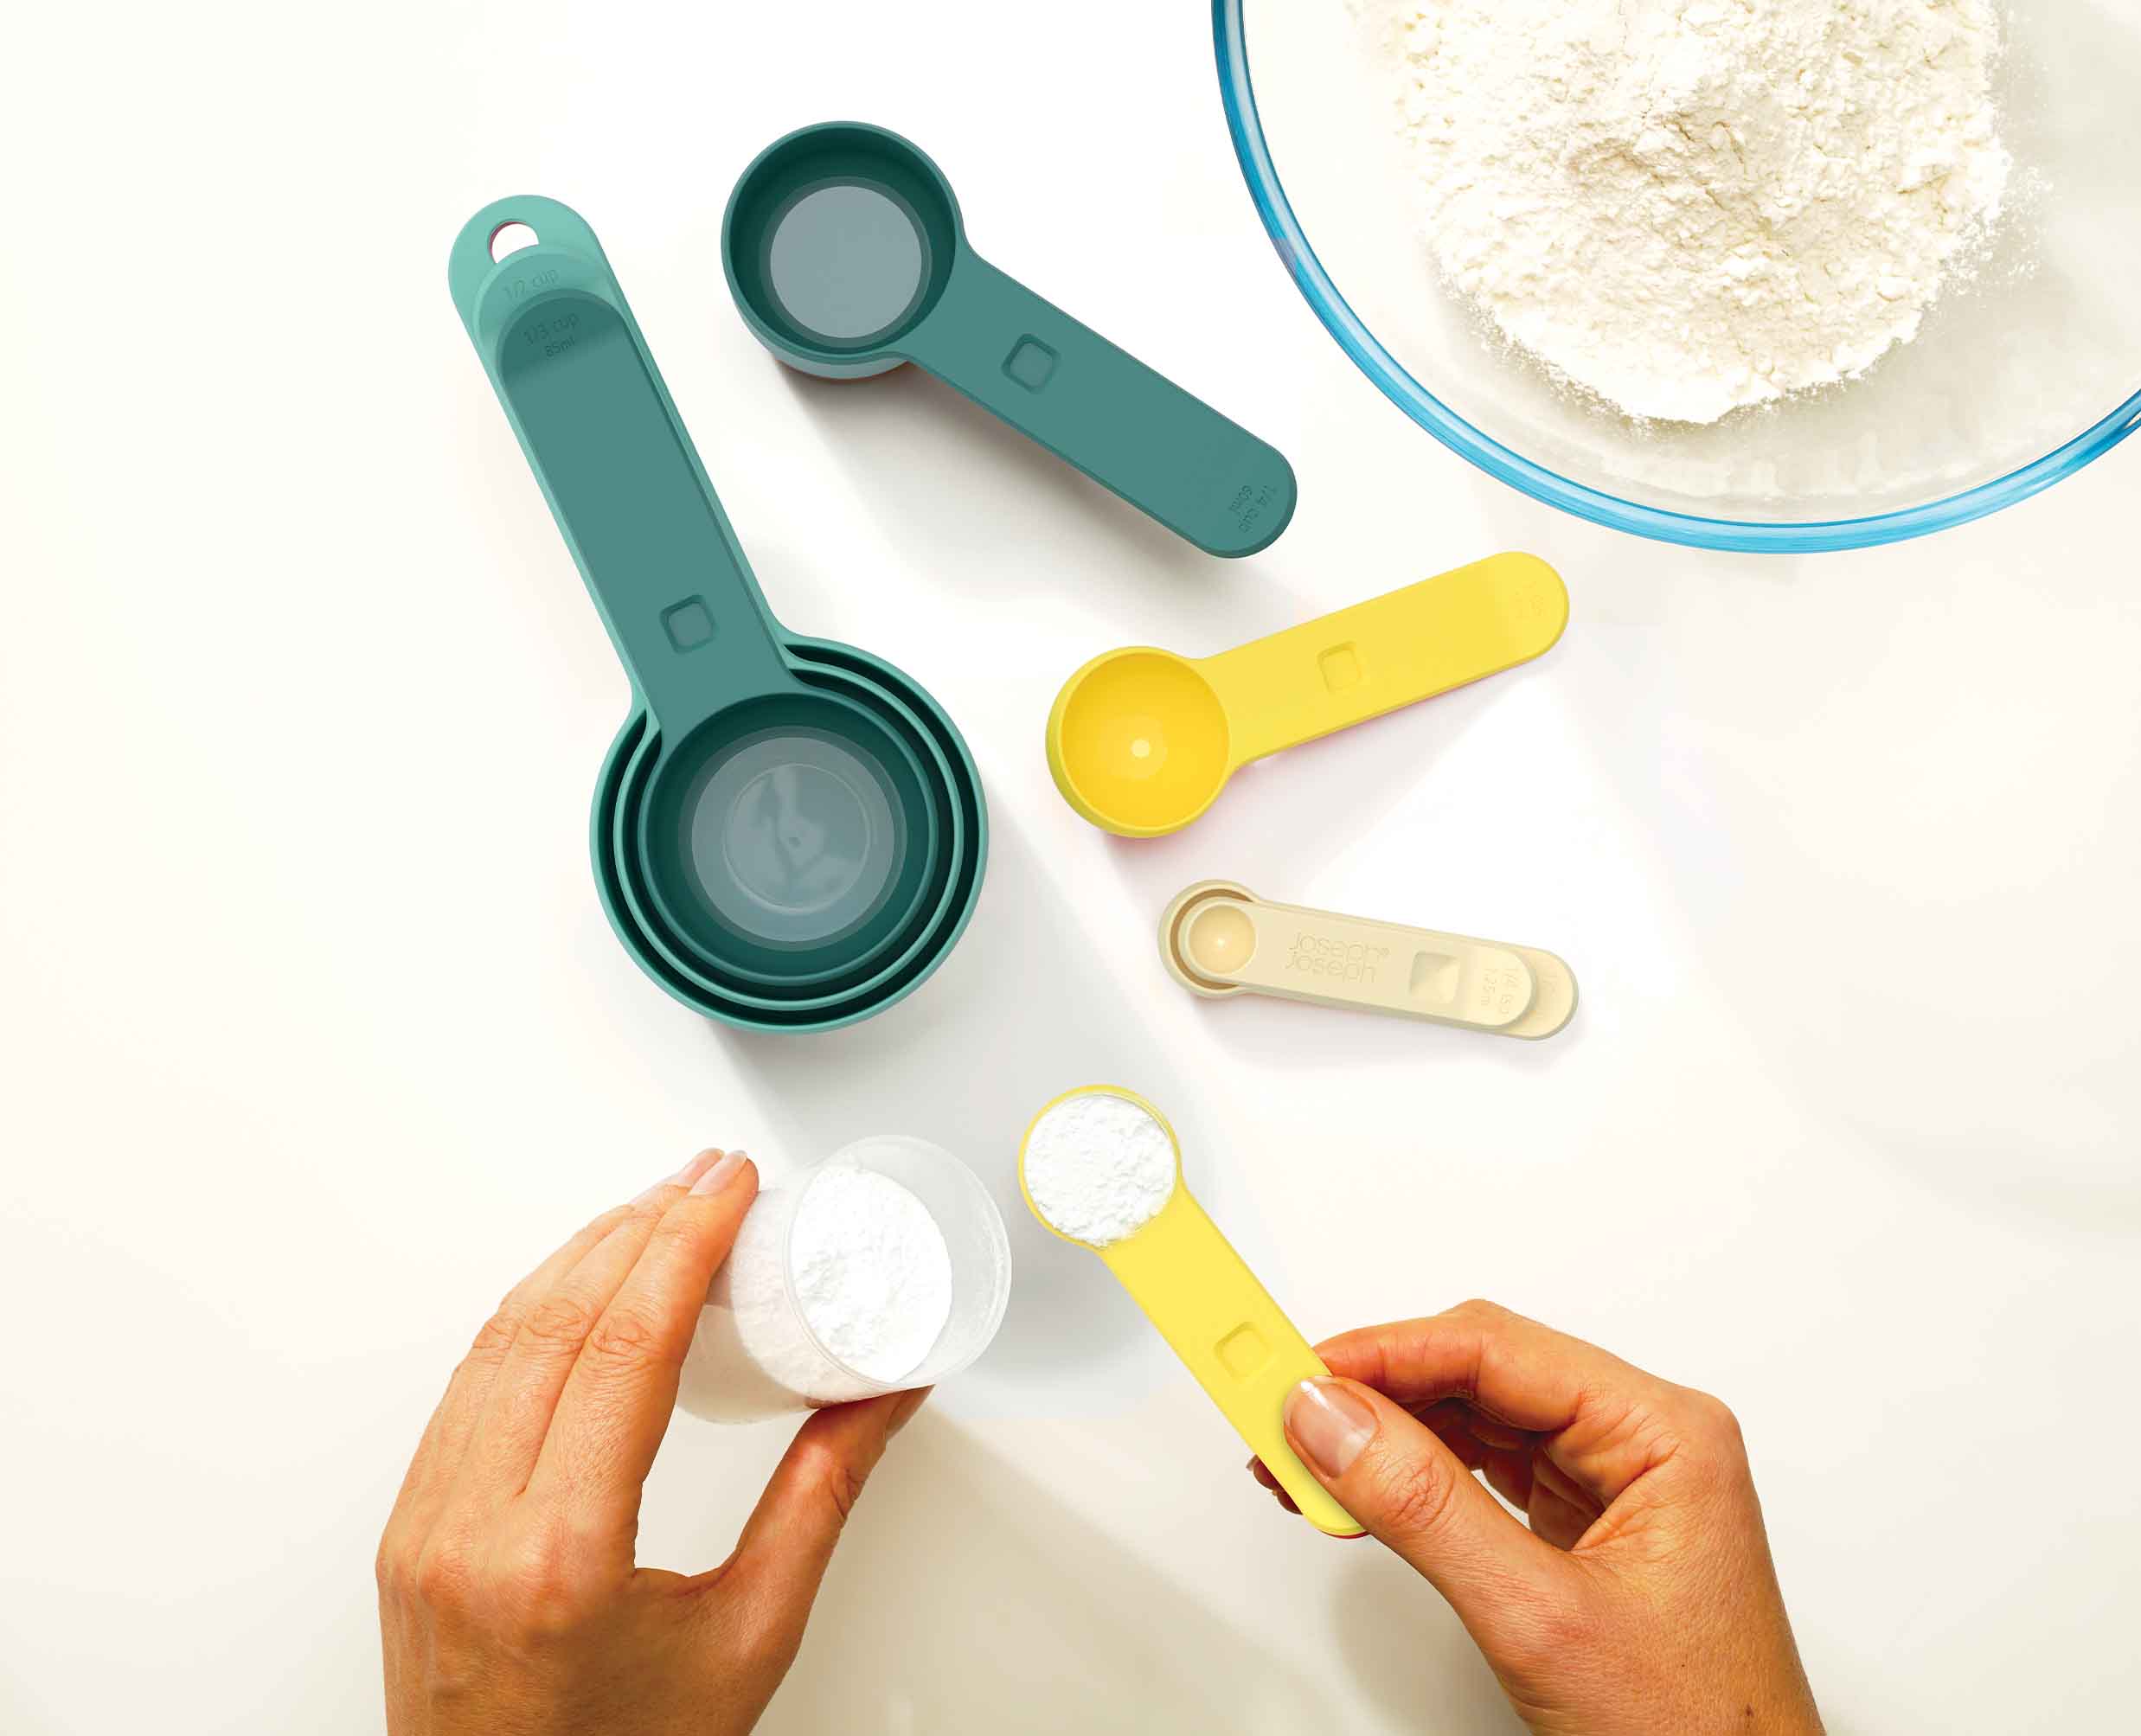 Nesting Measuring Cup Set – The Measuring Cup